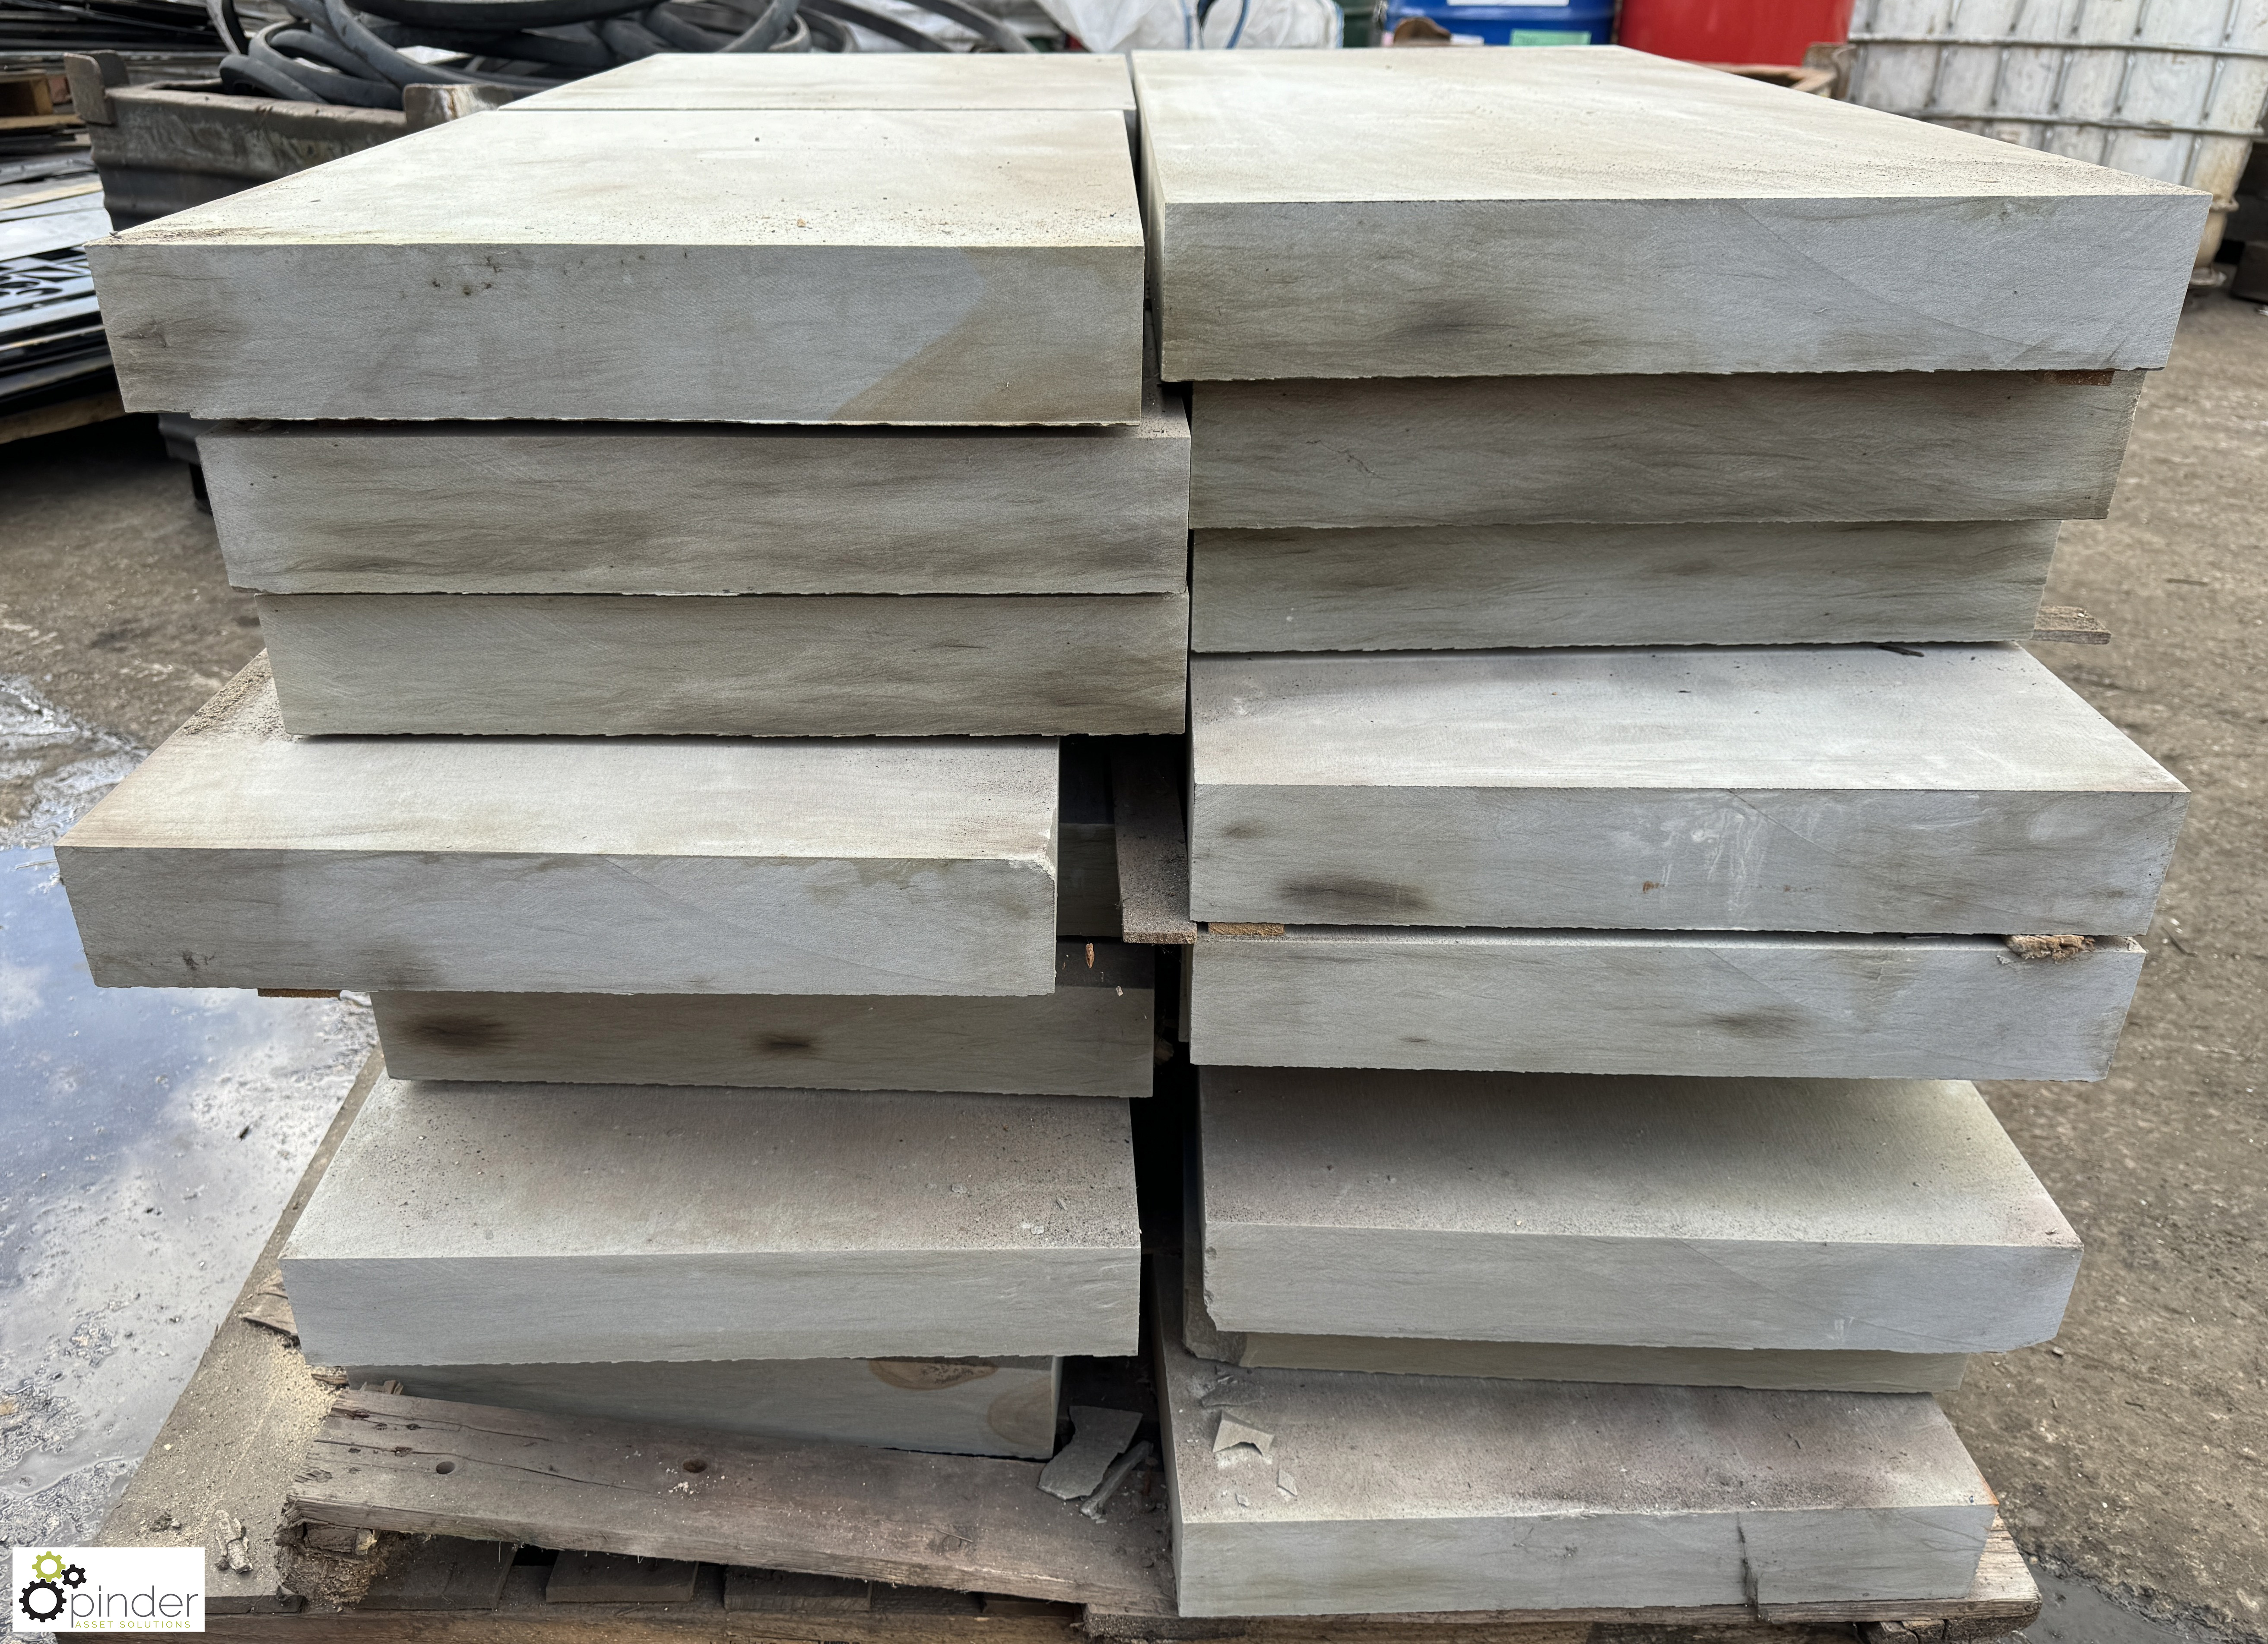 Pallet Sandstone Slabs from Millstone grit, various lengths x 450mm x 75mm - Image 5 of 7